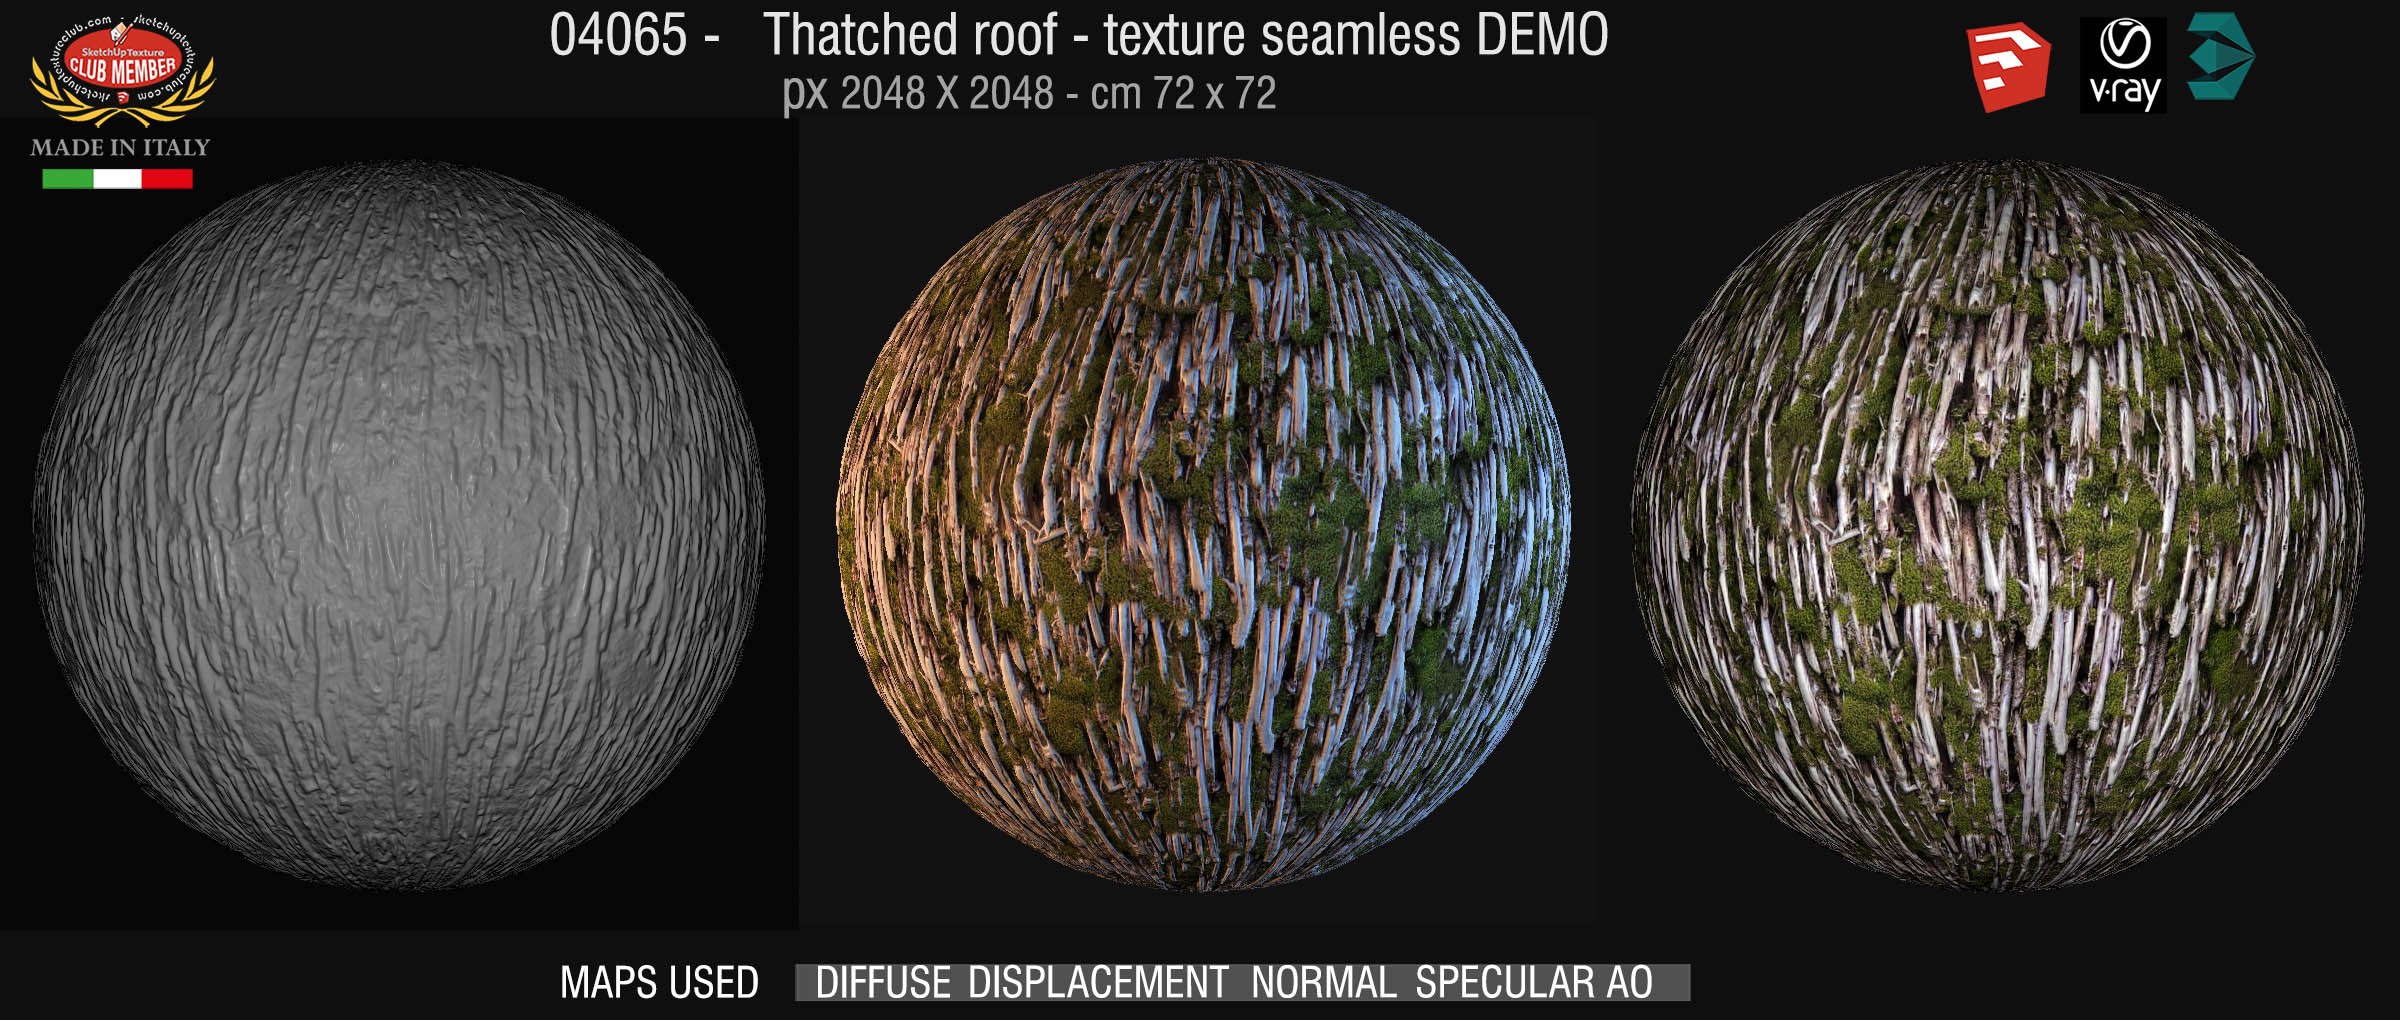 04065 Thatched roof texture seamless + maps DEMO